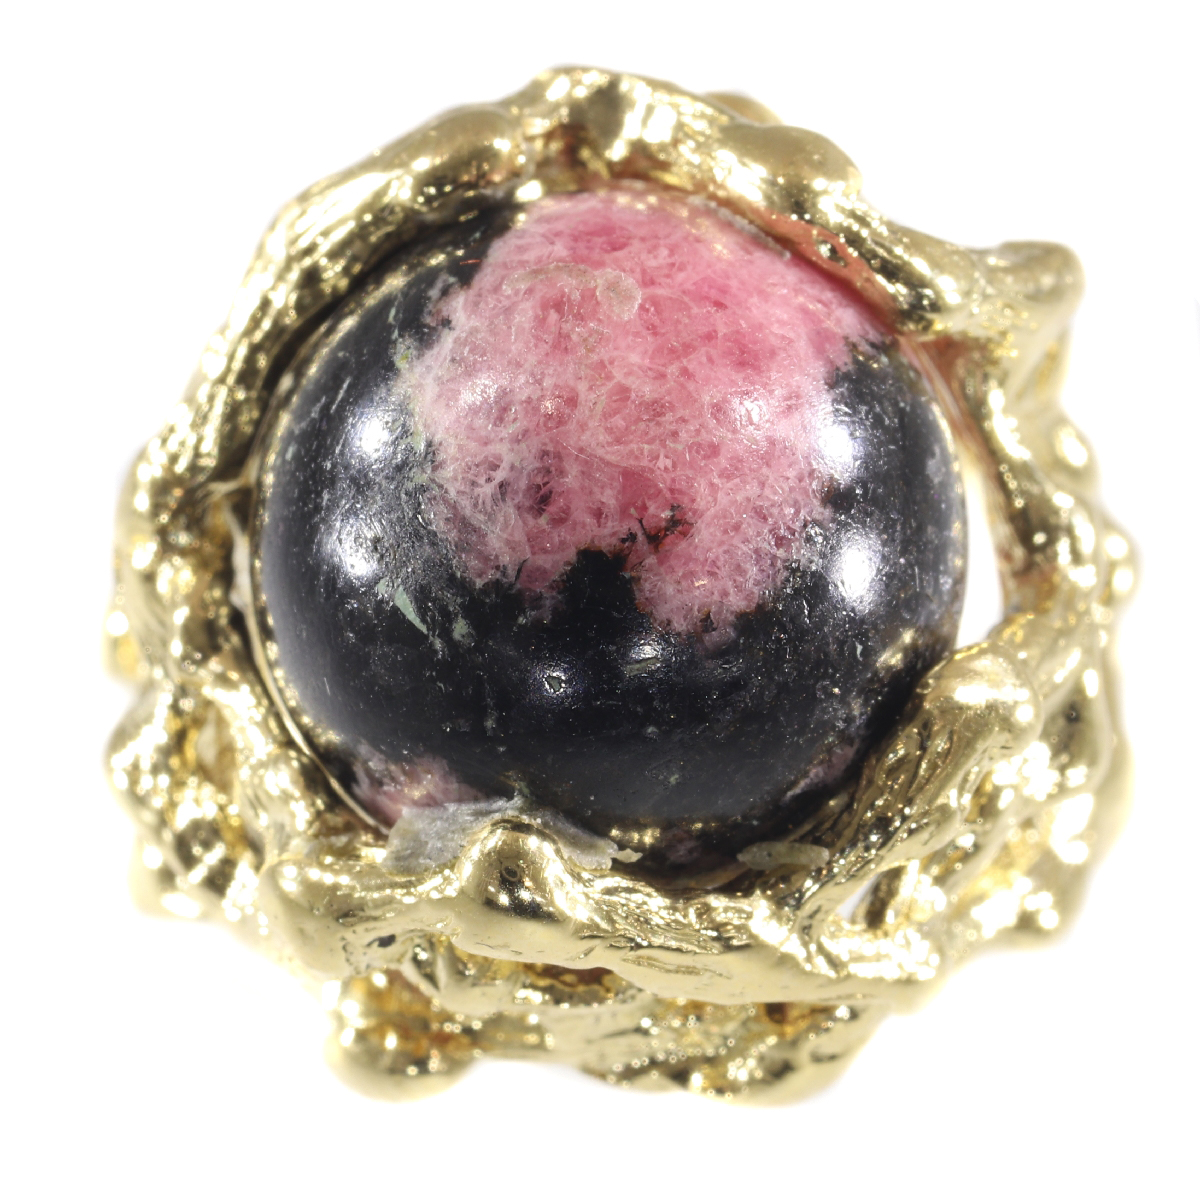 Vintage Sixties gold Art ring with interchangeable precious stones spheres